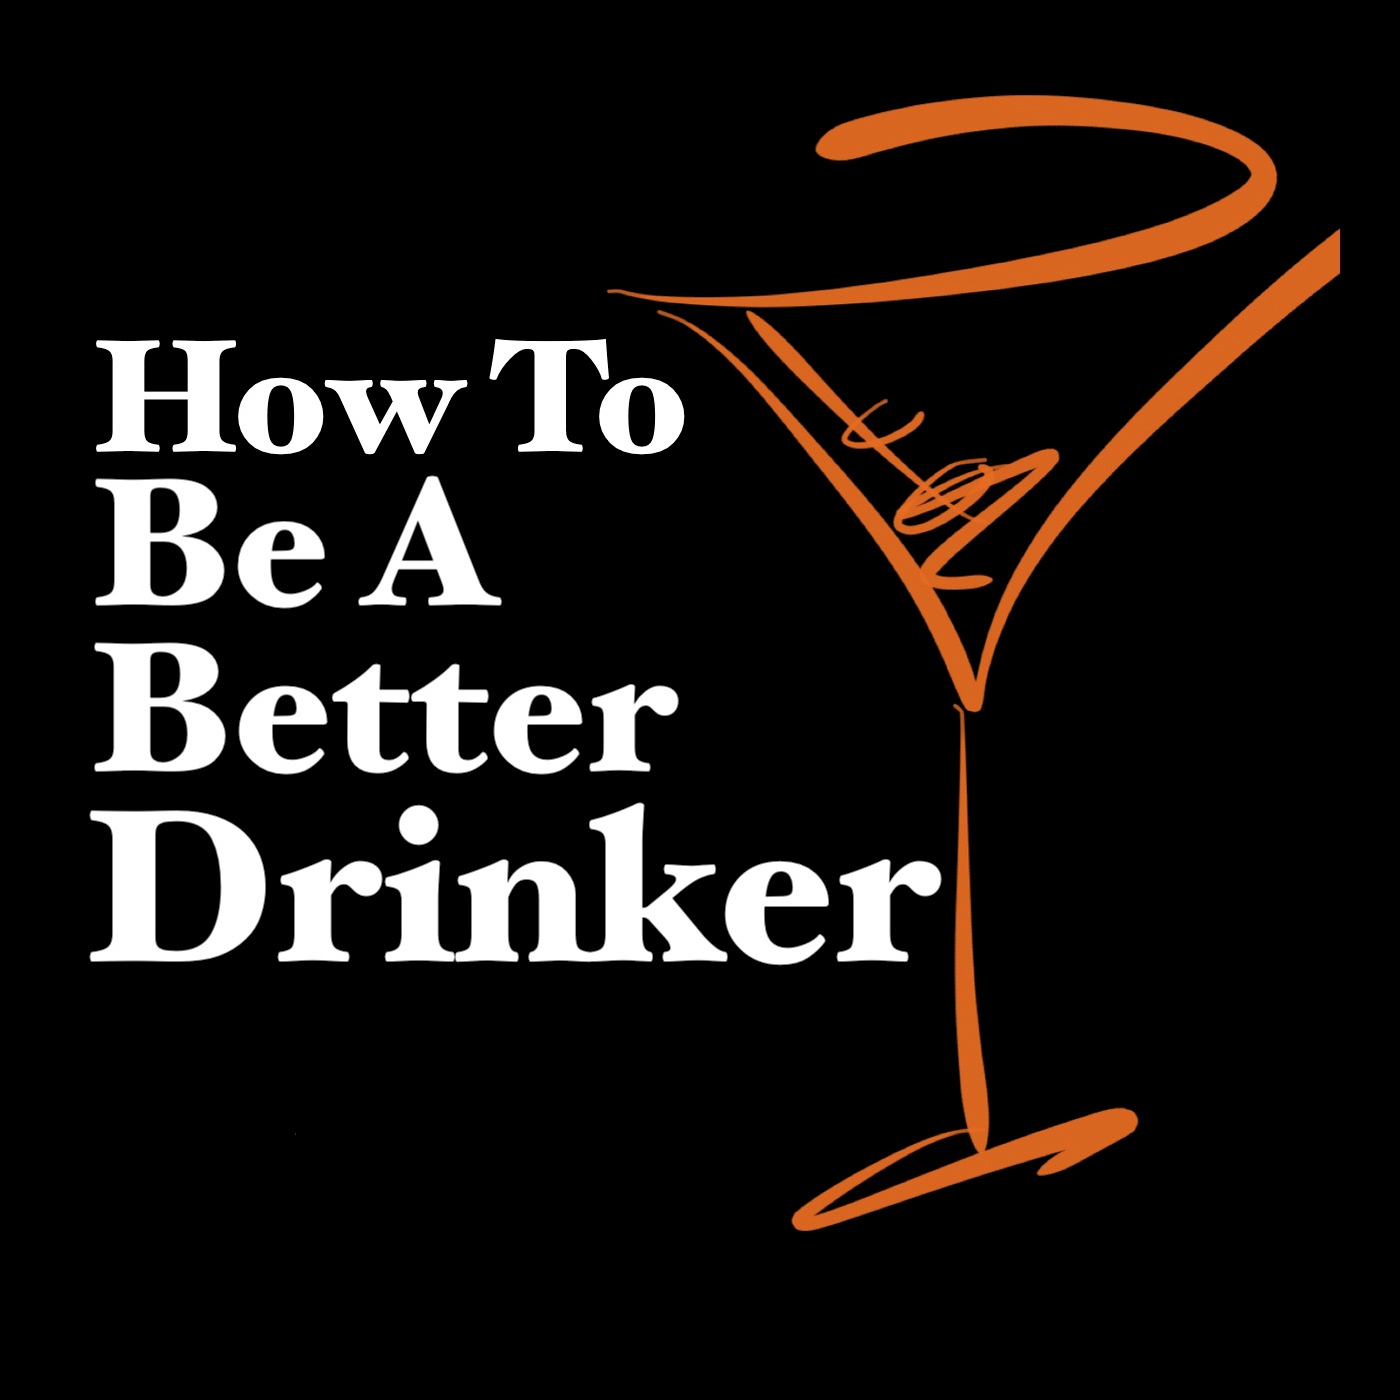 How To Be A Better Drinker